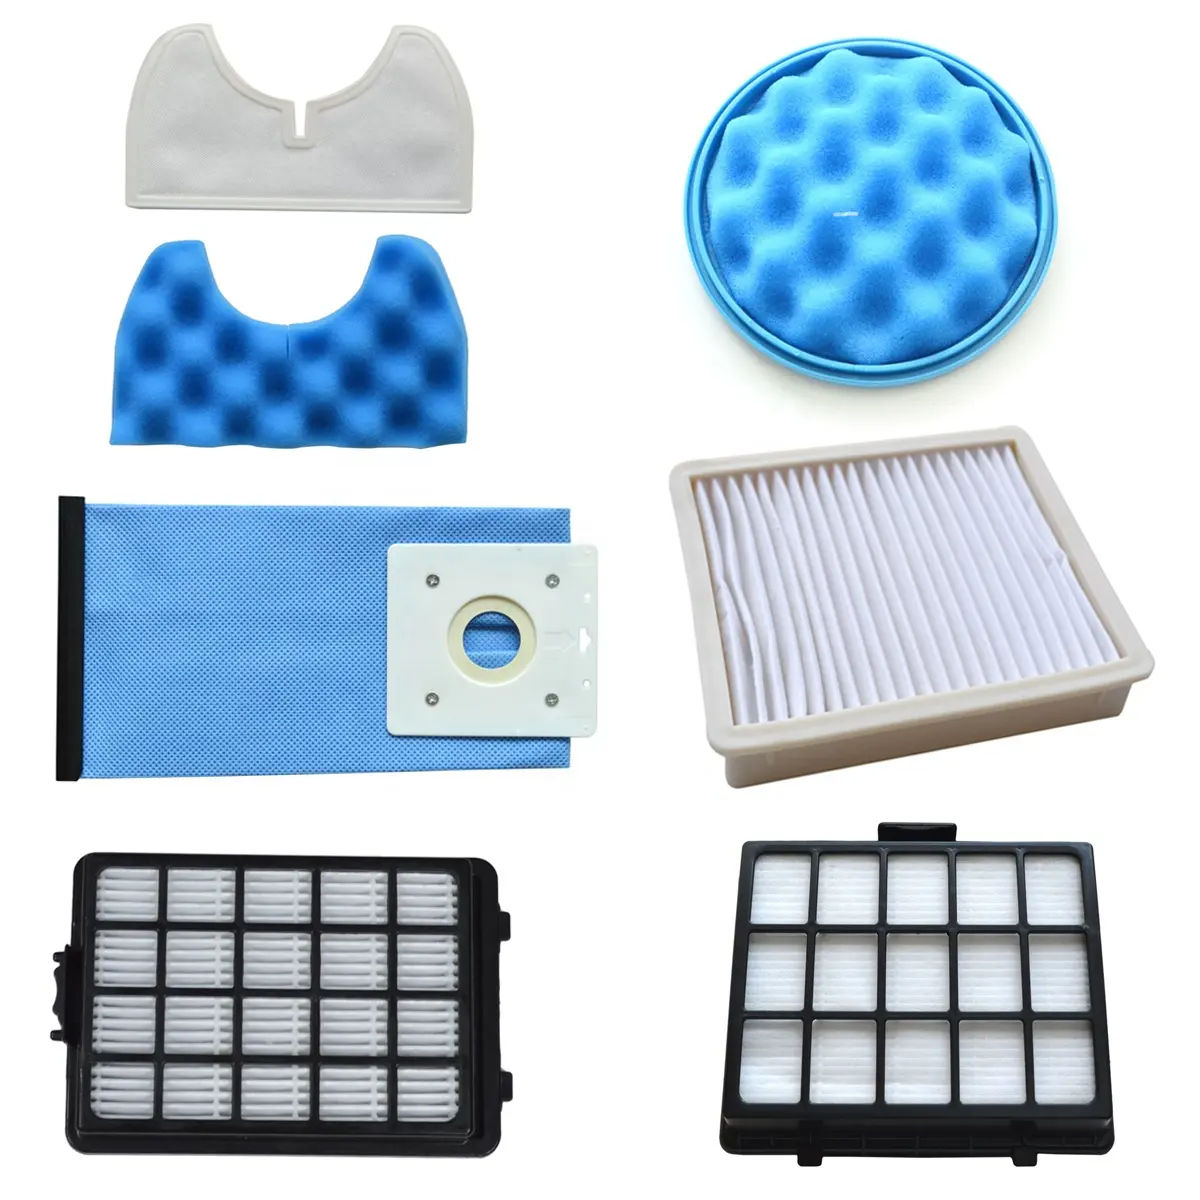 LAYO Factory ROHS REACH Vacuum Hepa Filter Dust Bag Replacement For Samsung Vacuum Cleaner Hepa Filter Bag Accessory Spare Parts